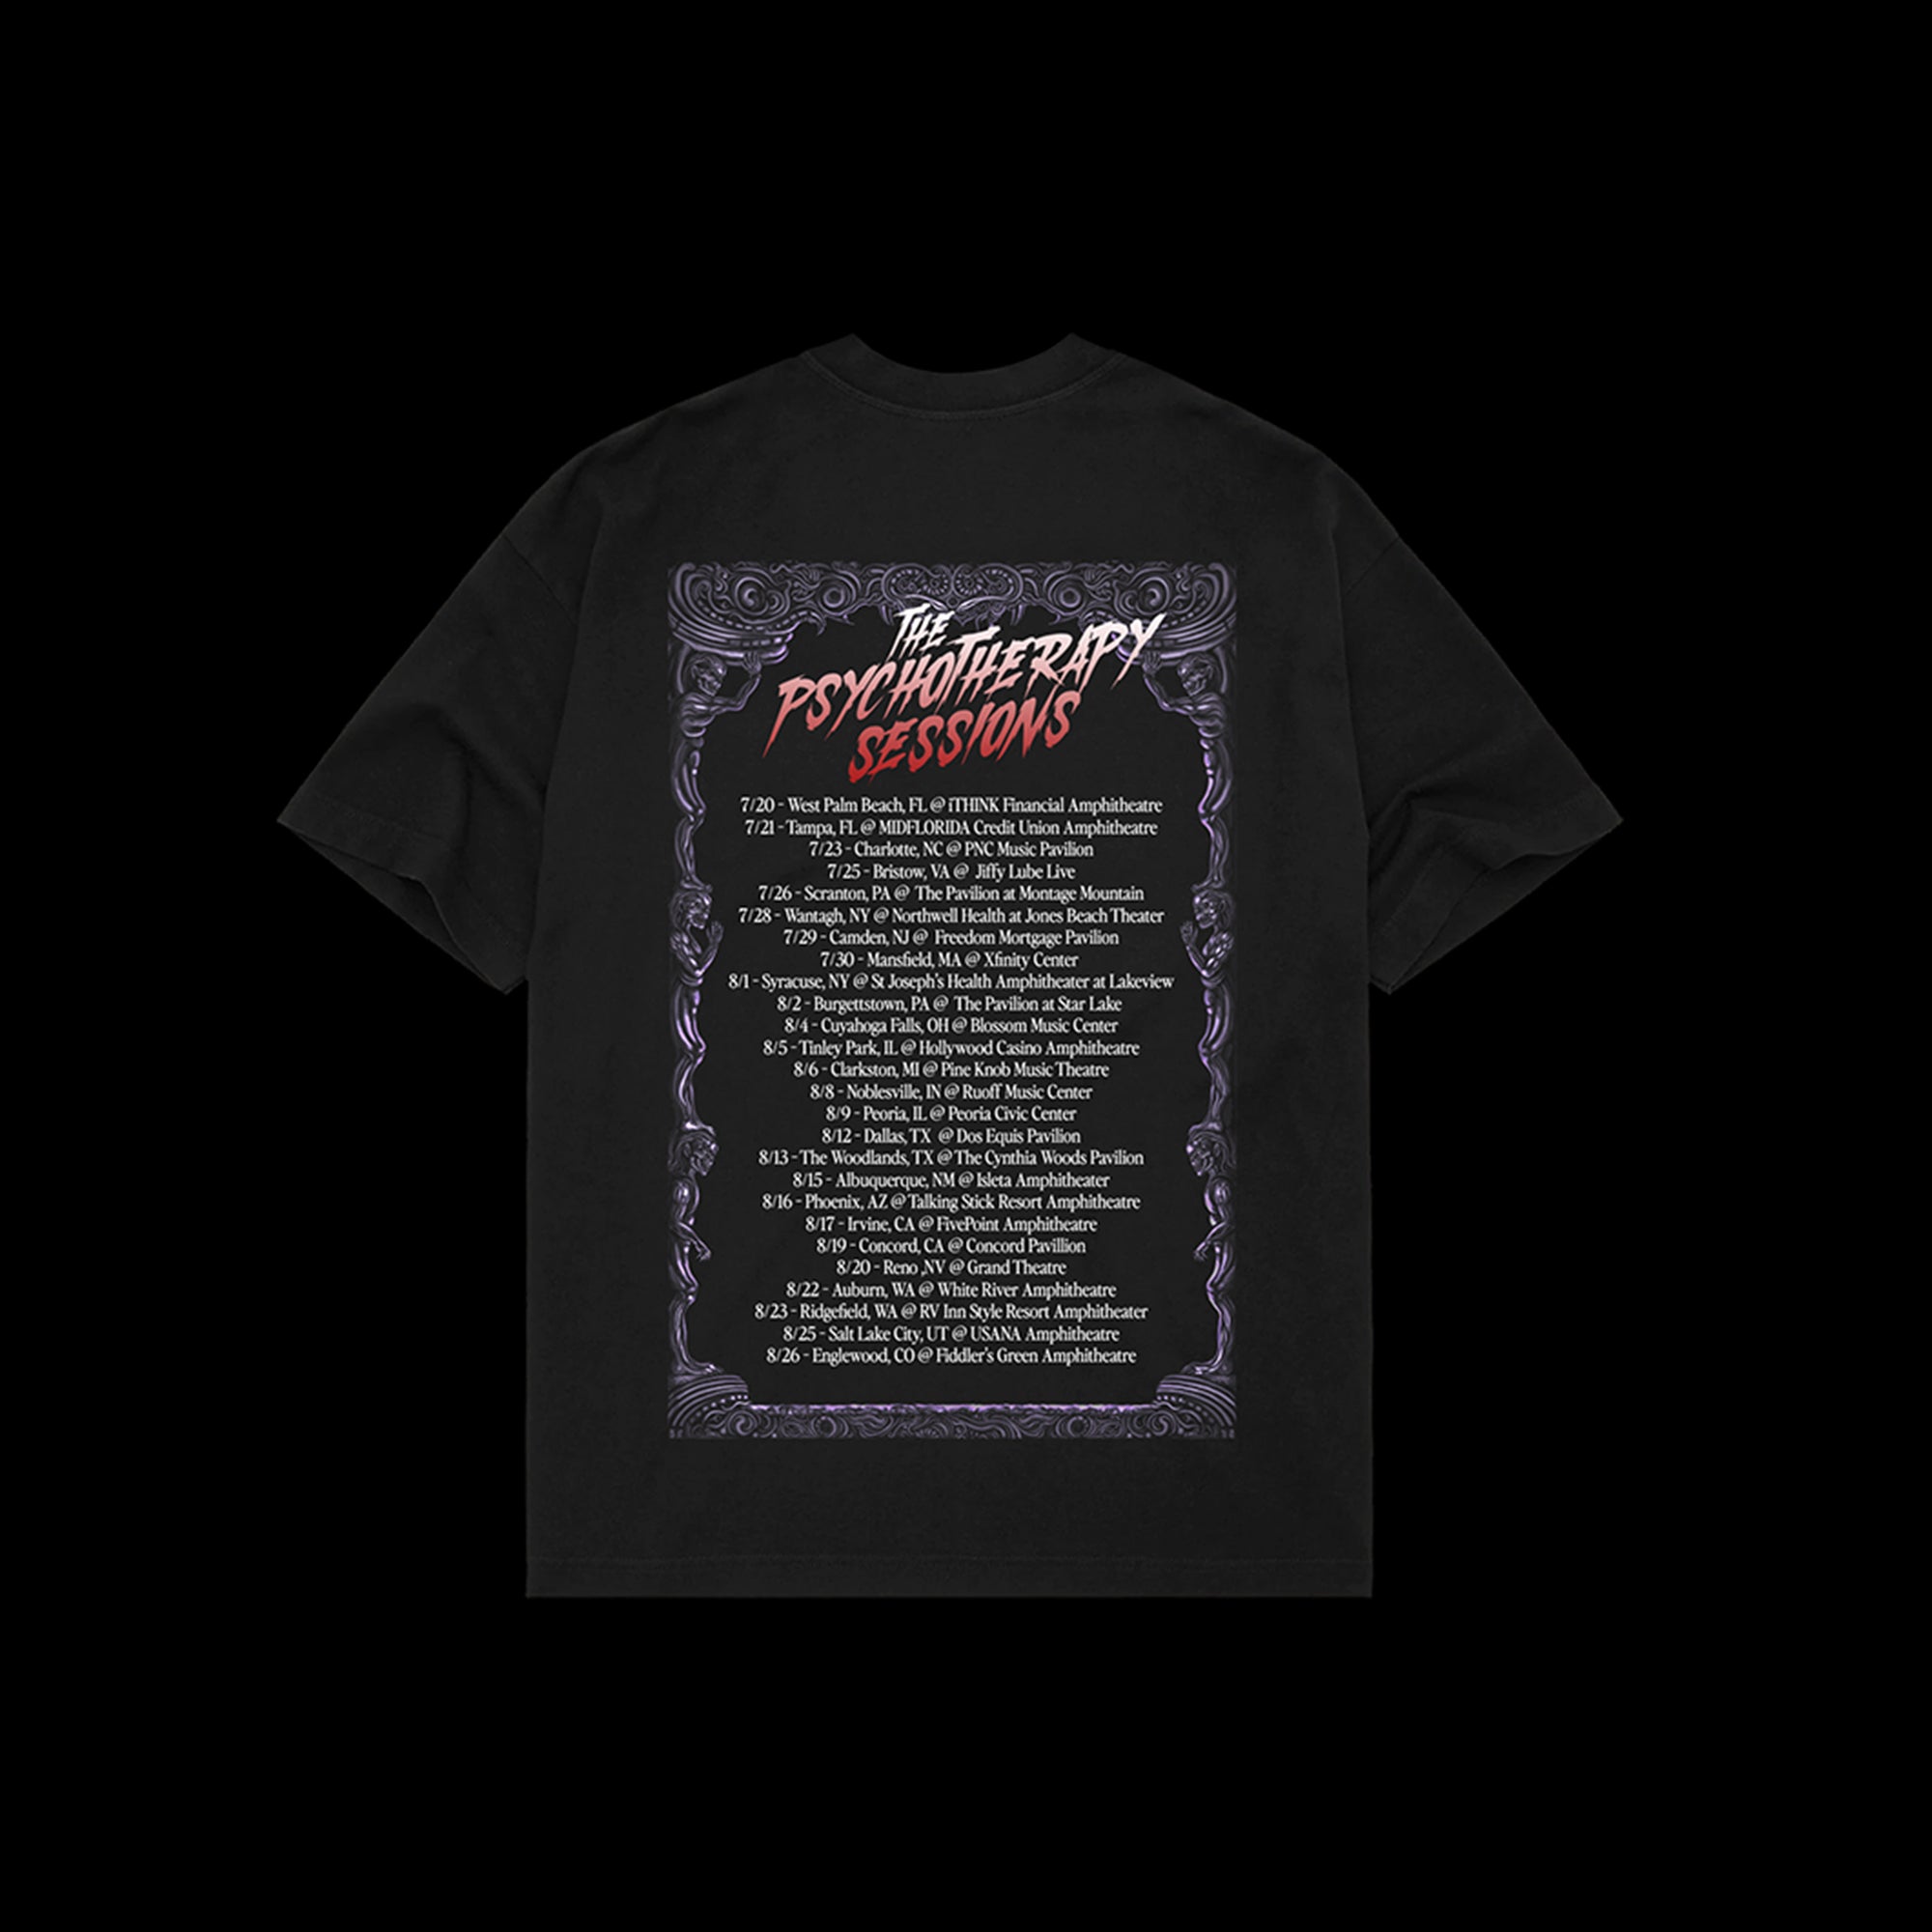 Psychotherapy Sessions Tour Black Tee. Back